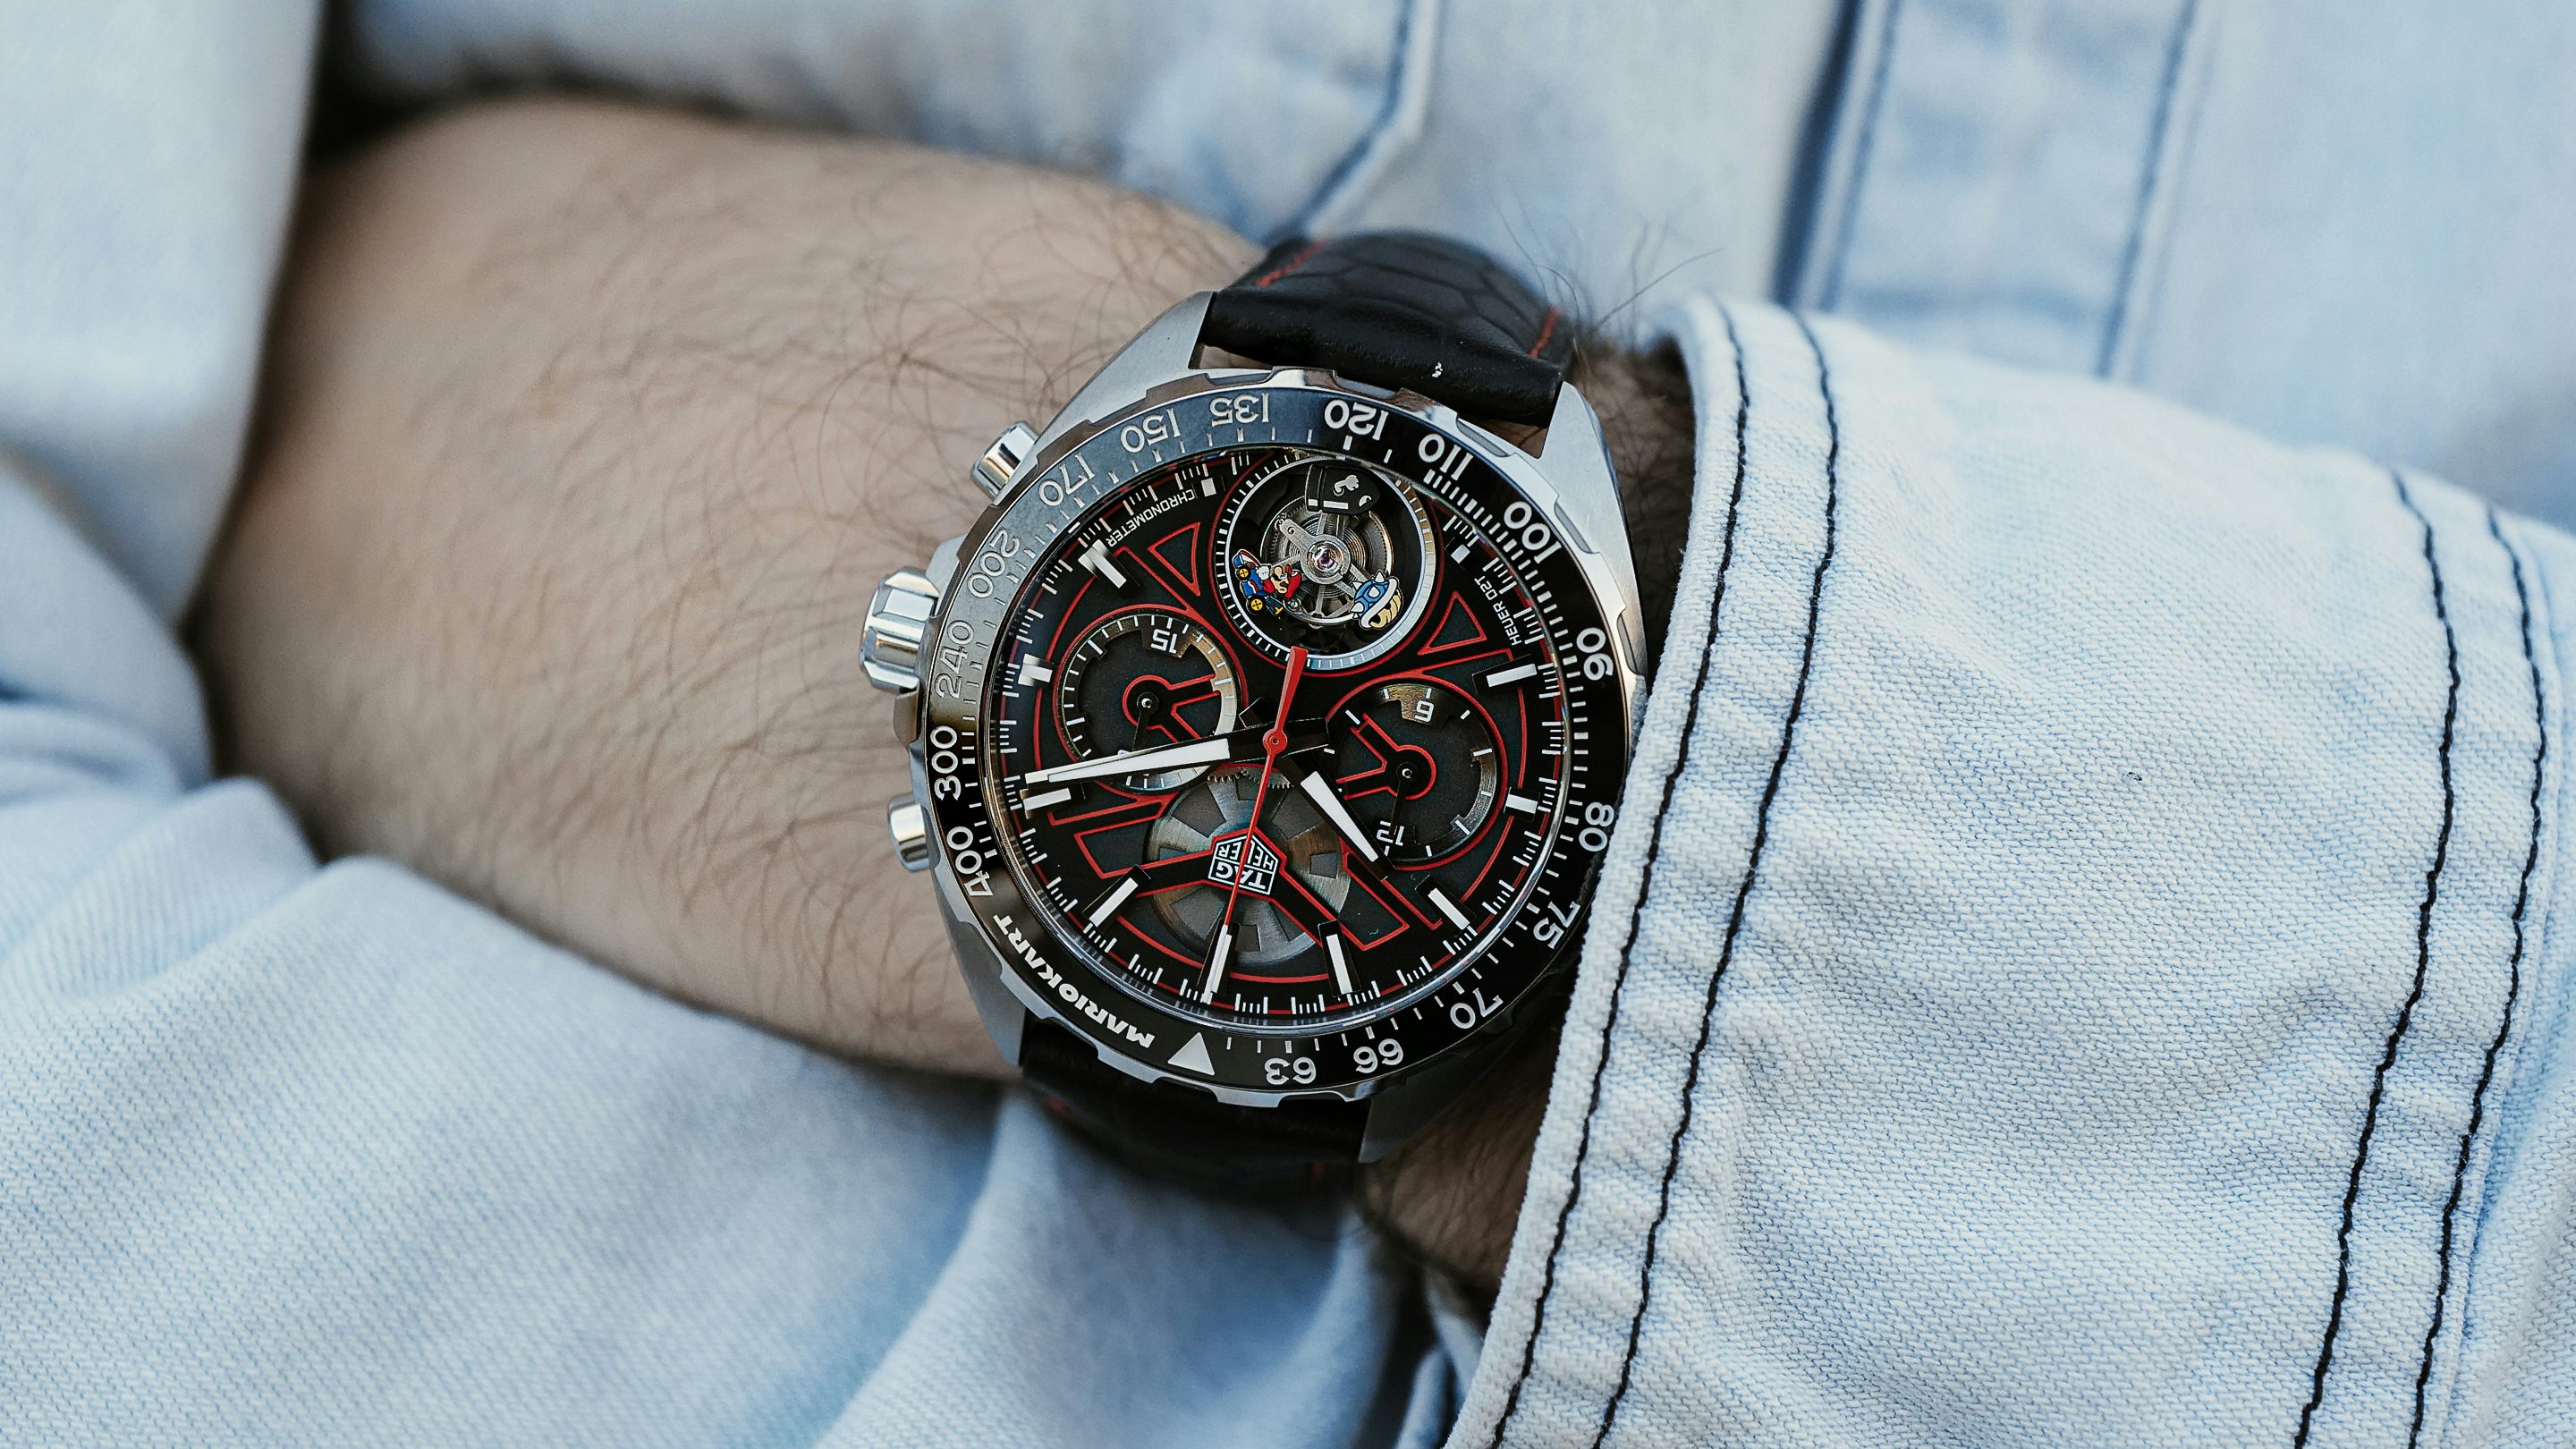 TAG Heuer: Awesome Or Average? Why TAG Watches Are Divisive